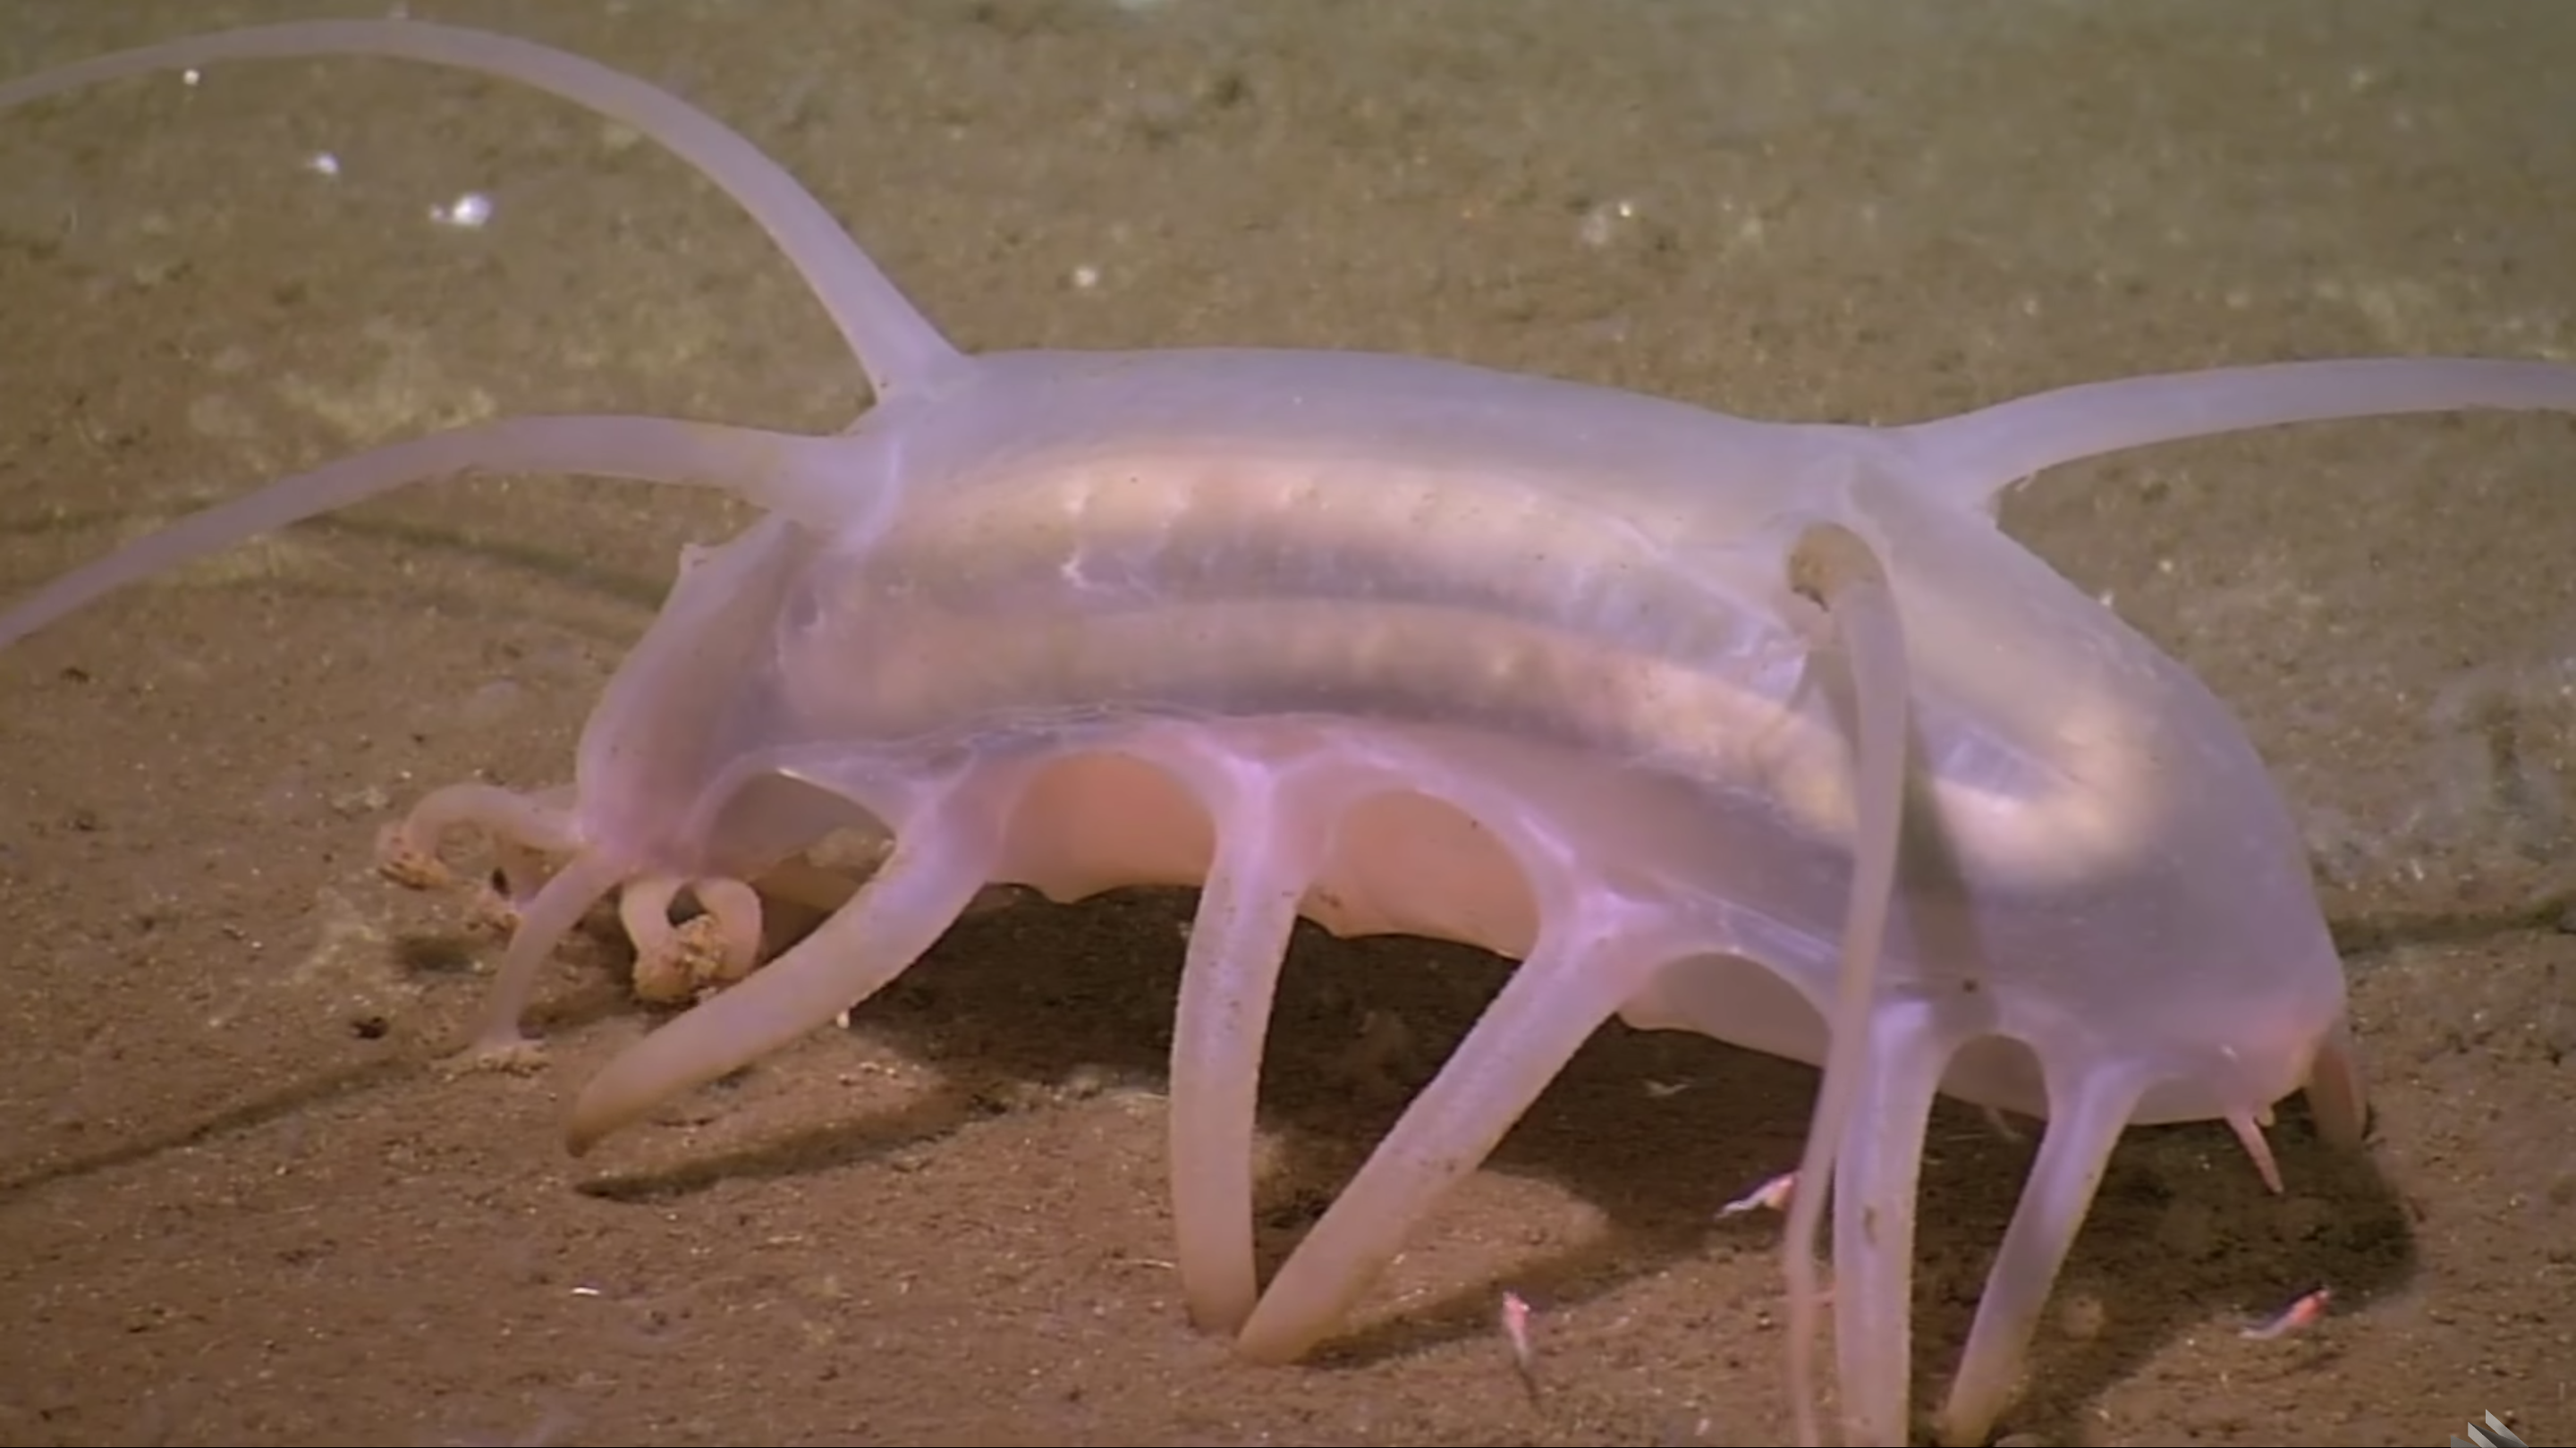 5 things you didn't know about sea pigs | MNN - Mother Nature Network